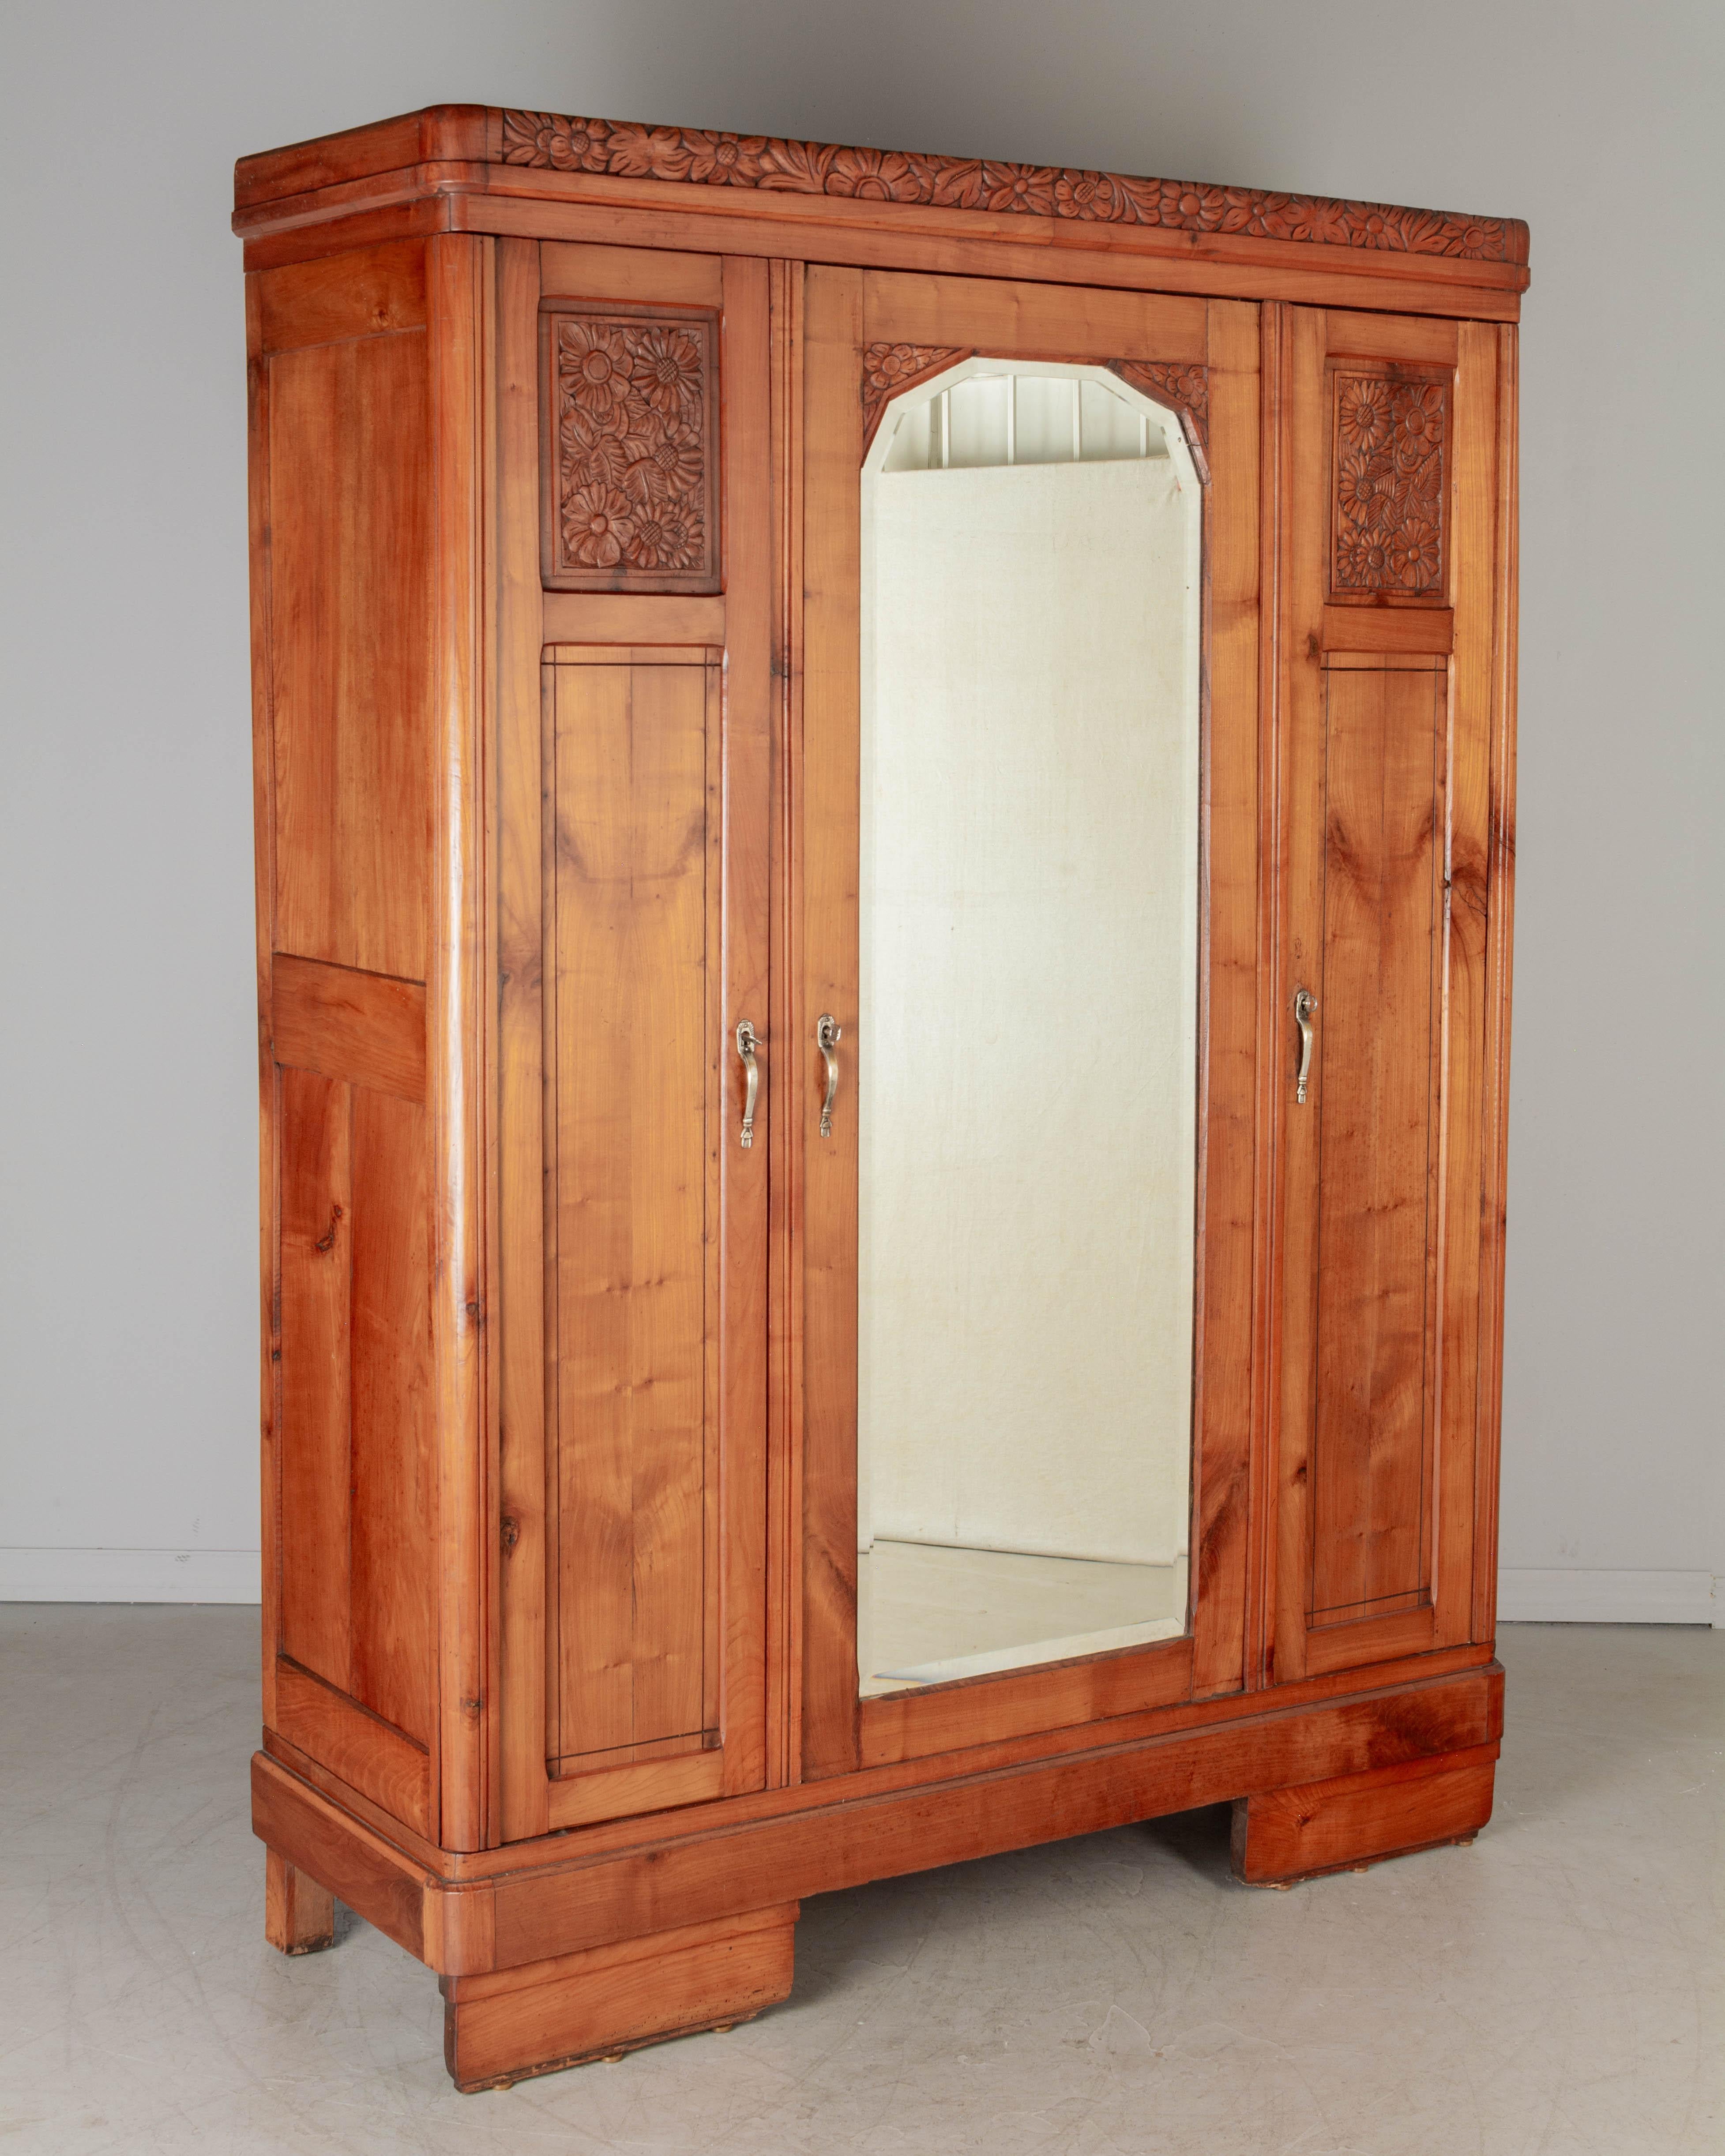 A French Art Deco three-door armoire made of solid cherry wood, nicely detailed with hand-carved stylized floral panels at the top. Center door with original beveled mirror. Nickel plated cast brass hardware with working locks and three keys. Right